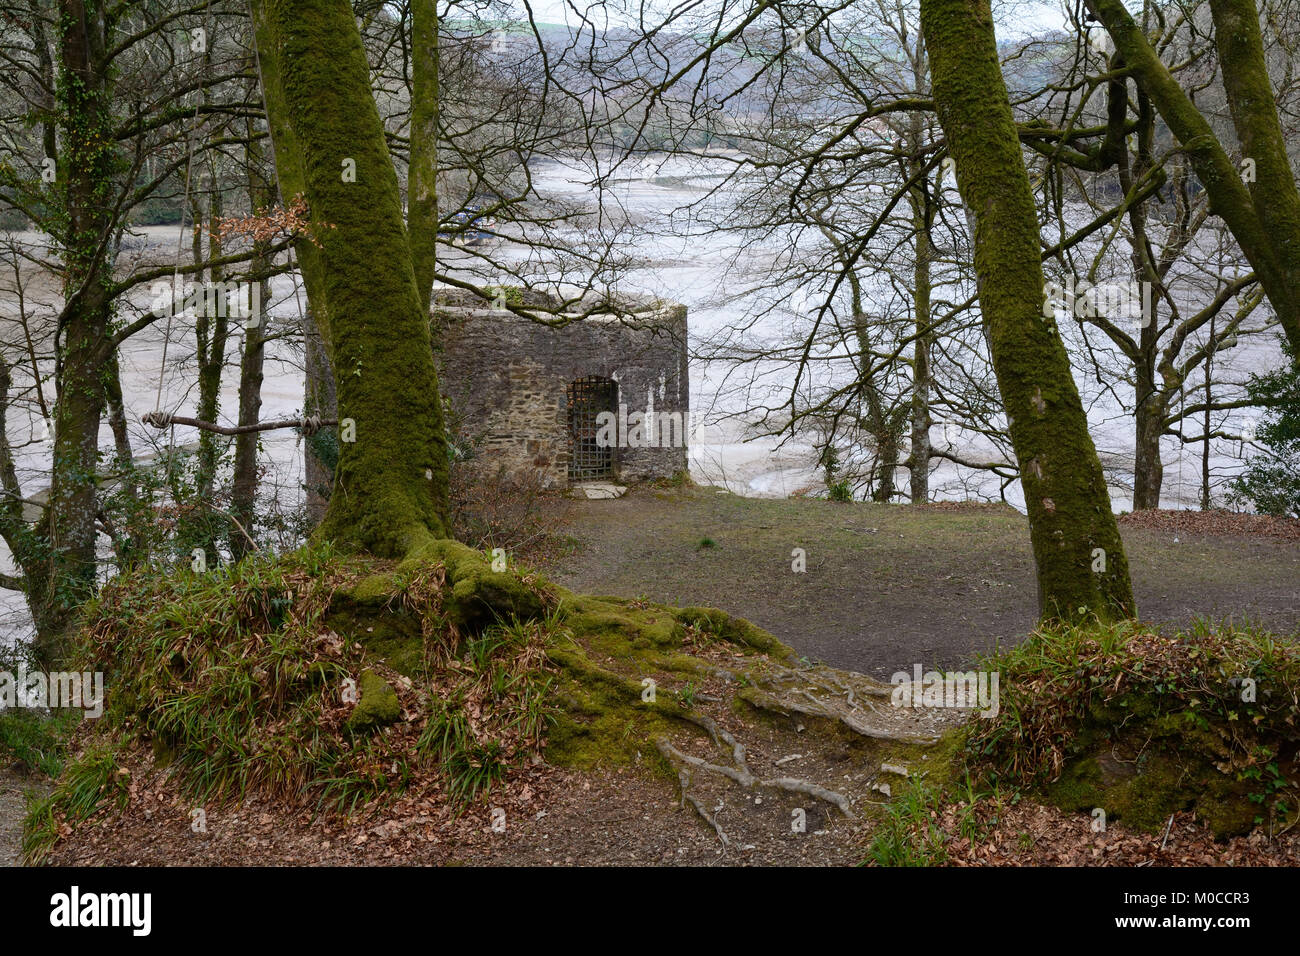 An architectural folly at Sandquay Woods, Old Mill, Dartmouth Devon. Stock Photo